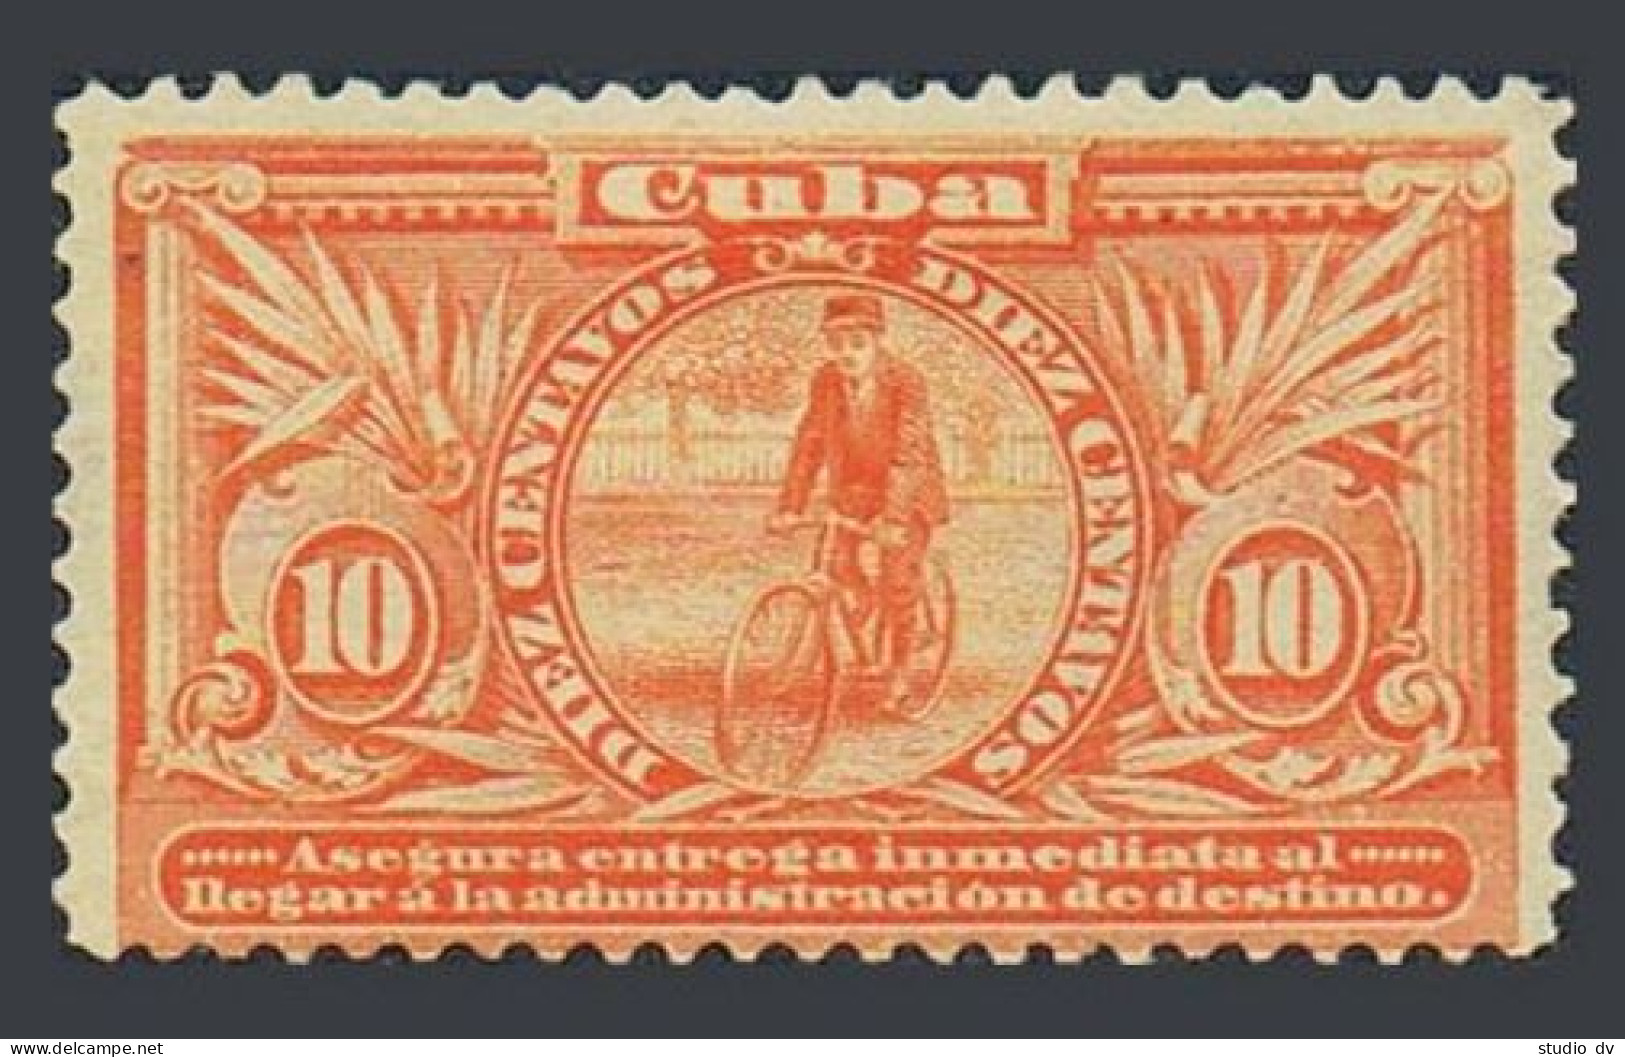 Cuba E3 INMEDIATA, MNH. Michel 6-II Special Delivery 1902. Messenger, Cycle. - Ungebraucht